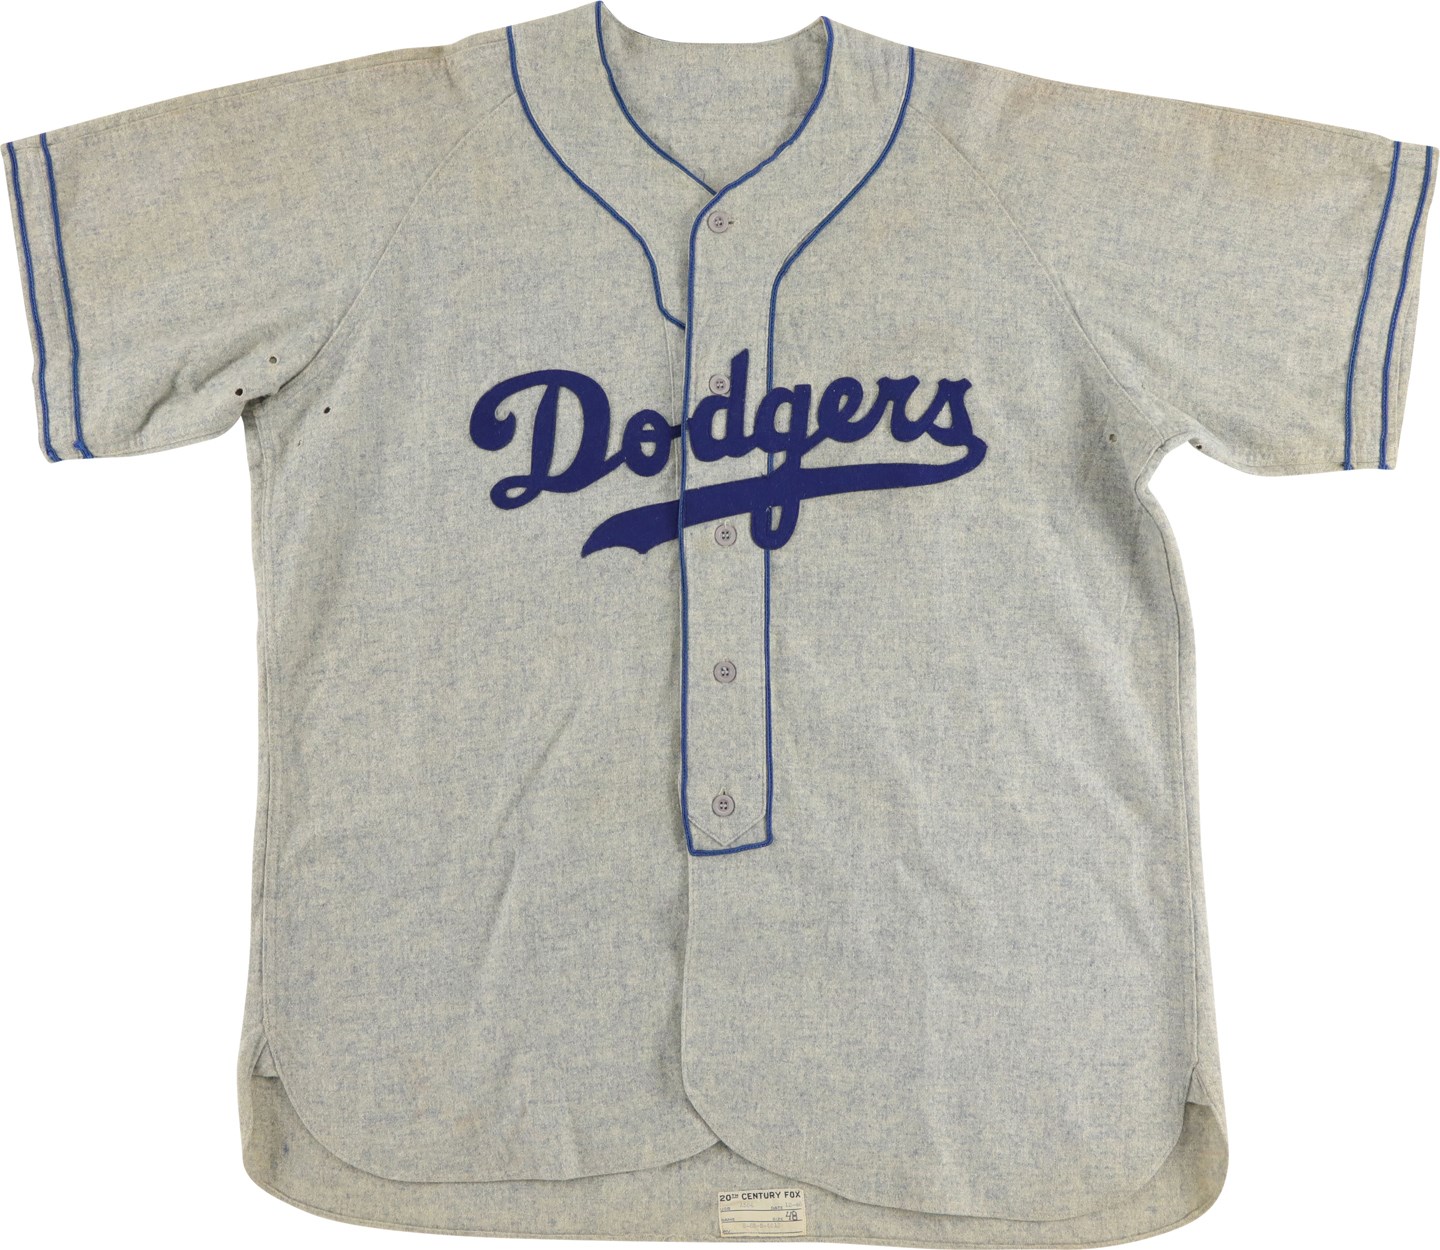 Baseball Equipment - Brooklyn Dodgers Jersey Worn in The Jackie Robinson Story